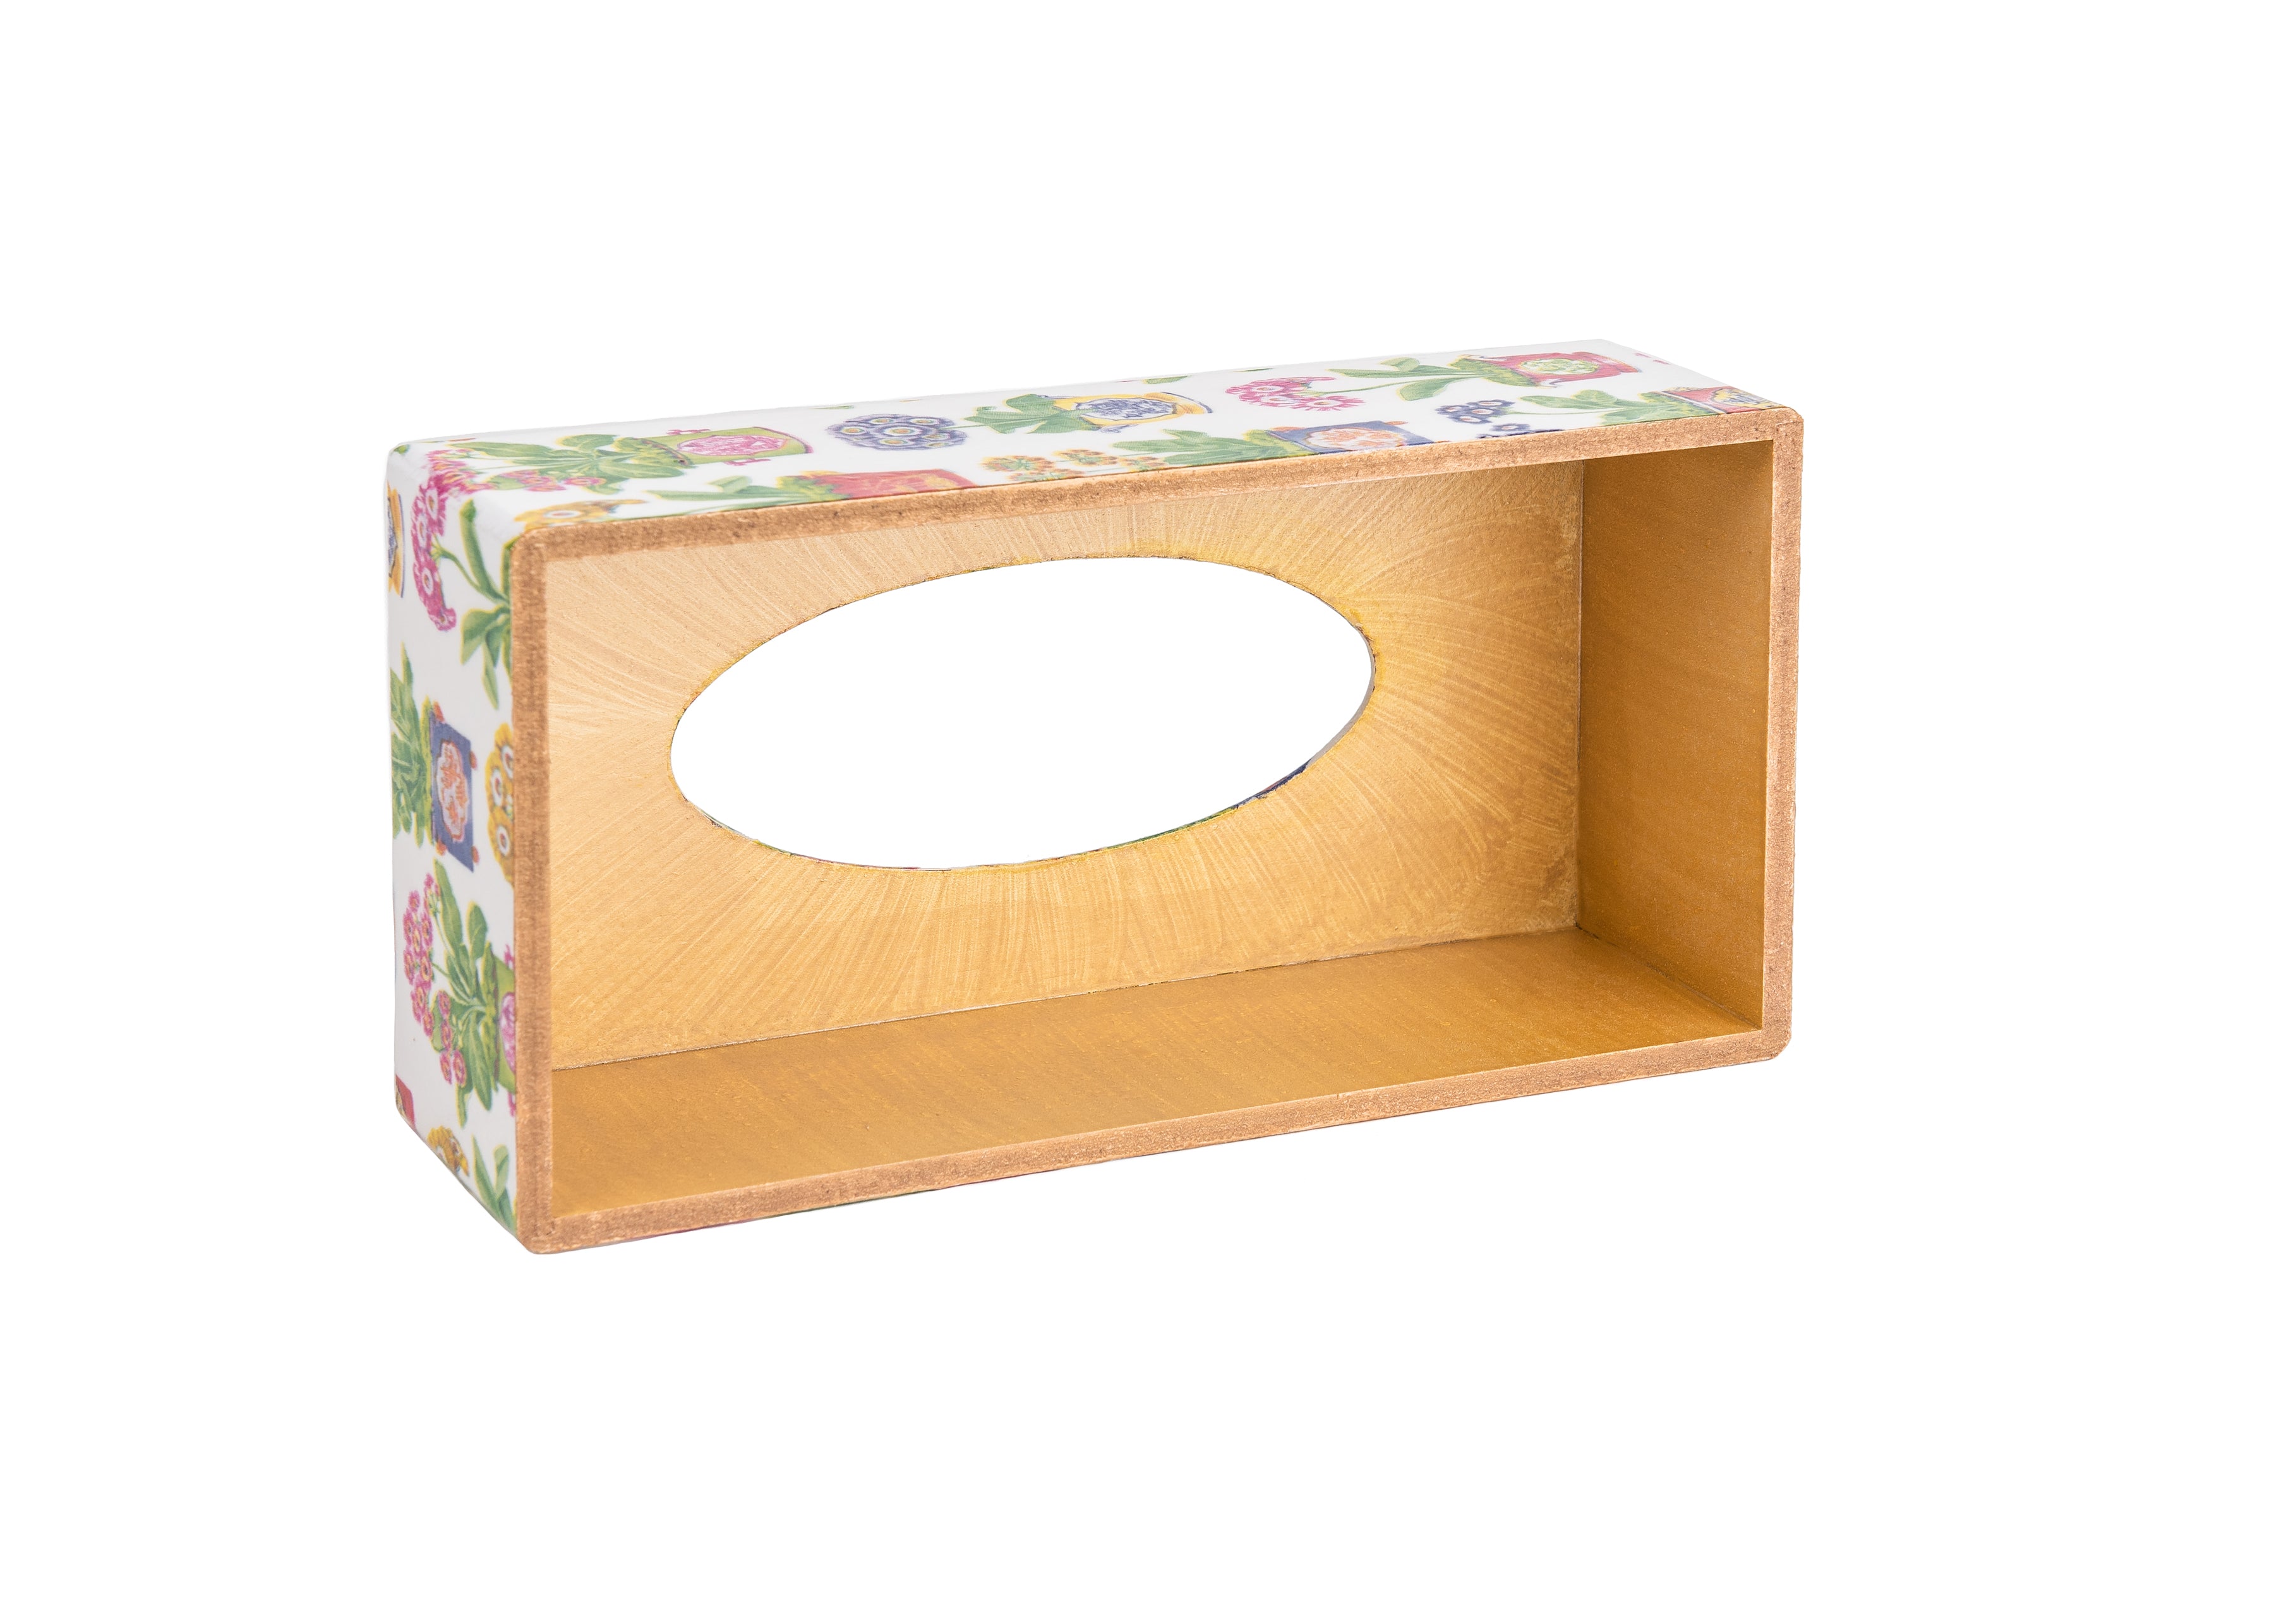 Indian Elephant Rectangle Tissue Box Cover